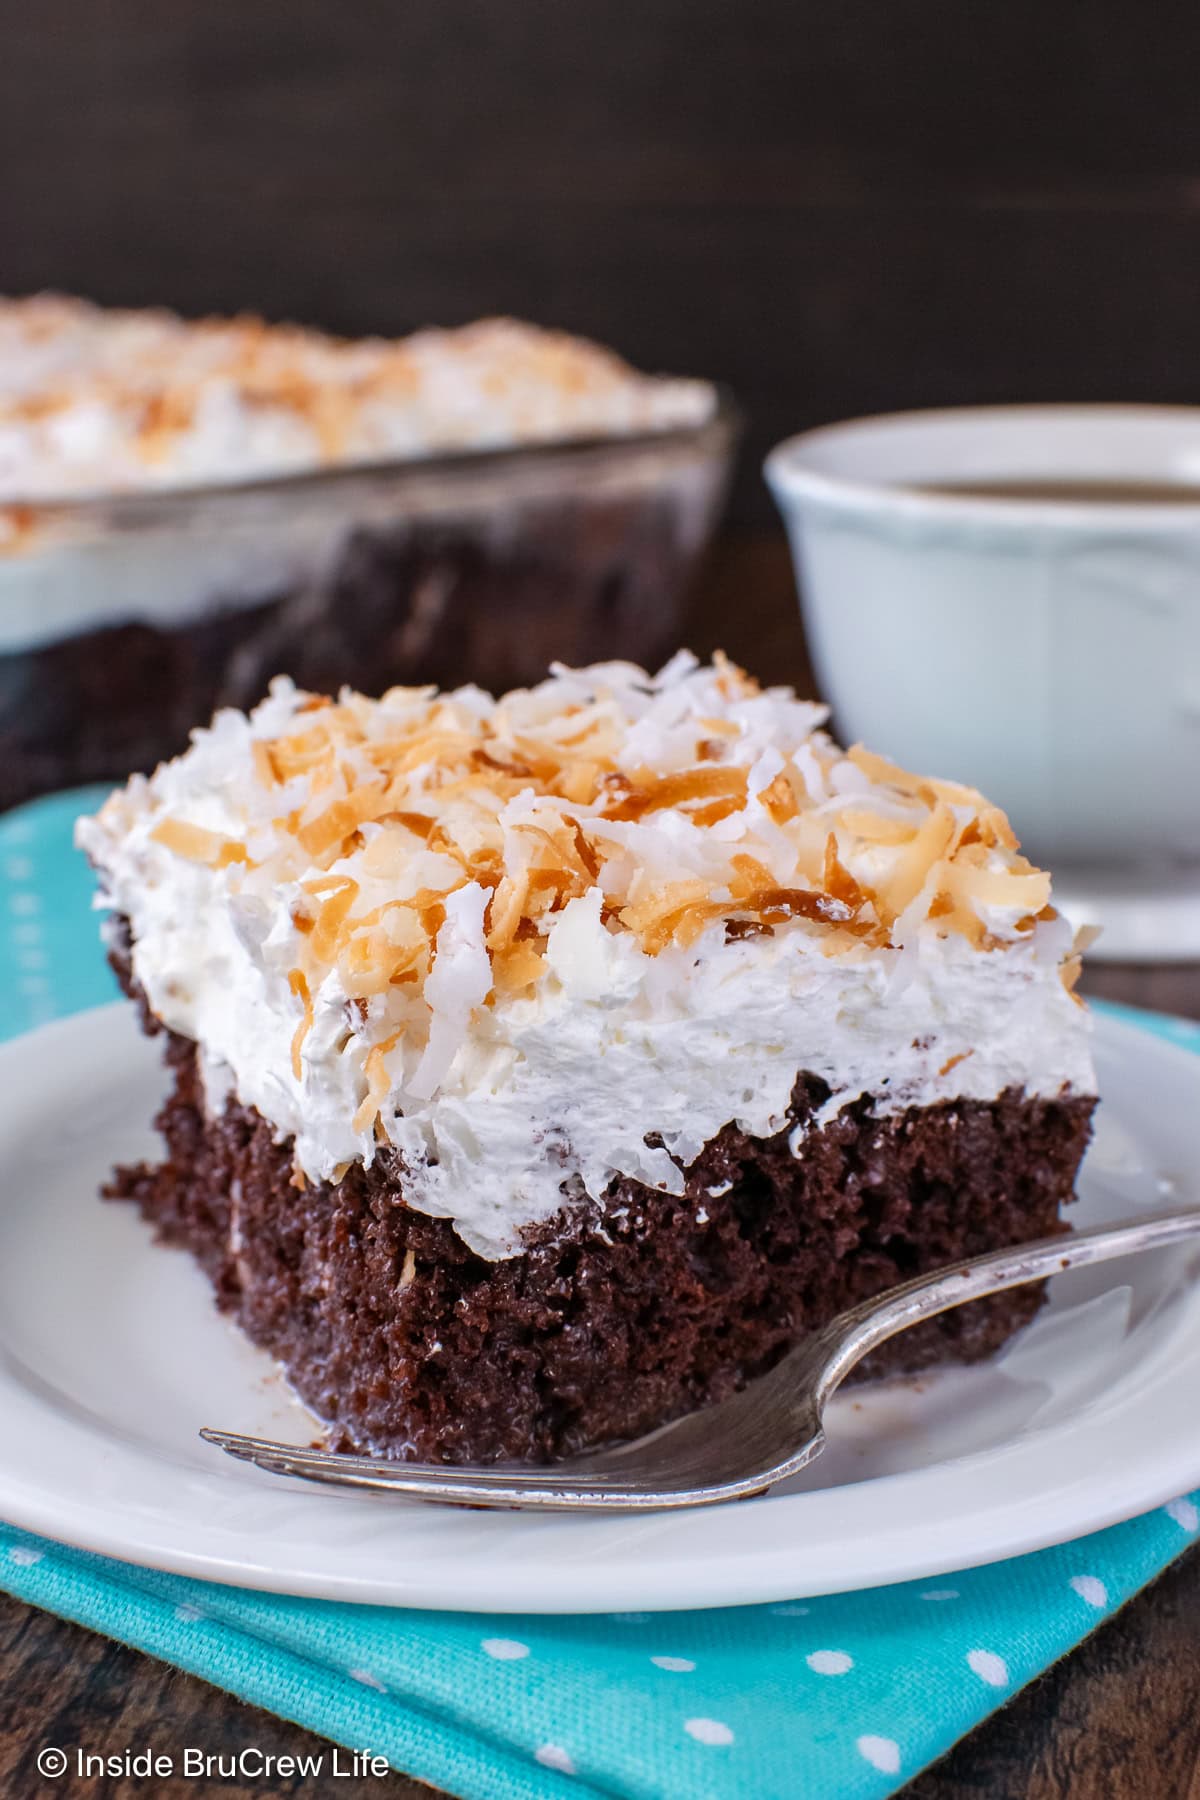 A slice of chocolate cream of coconut cake on a white plate.